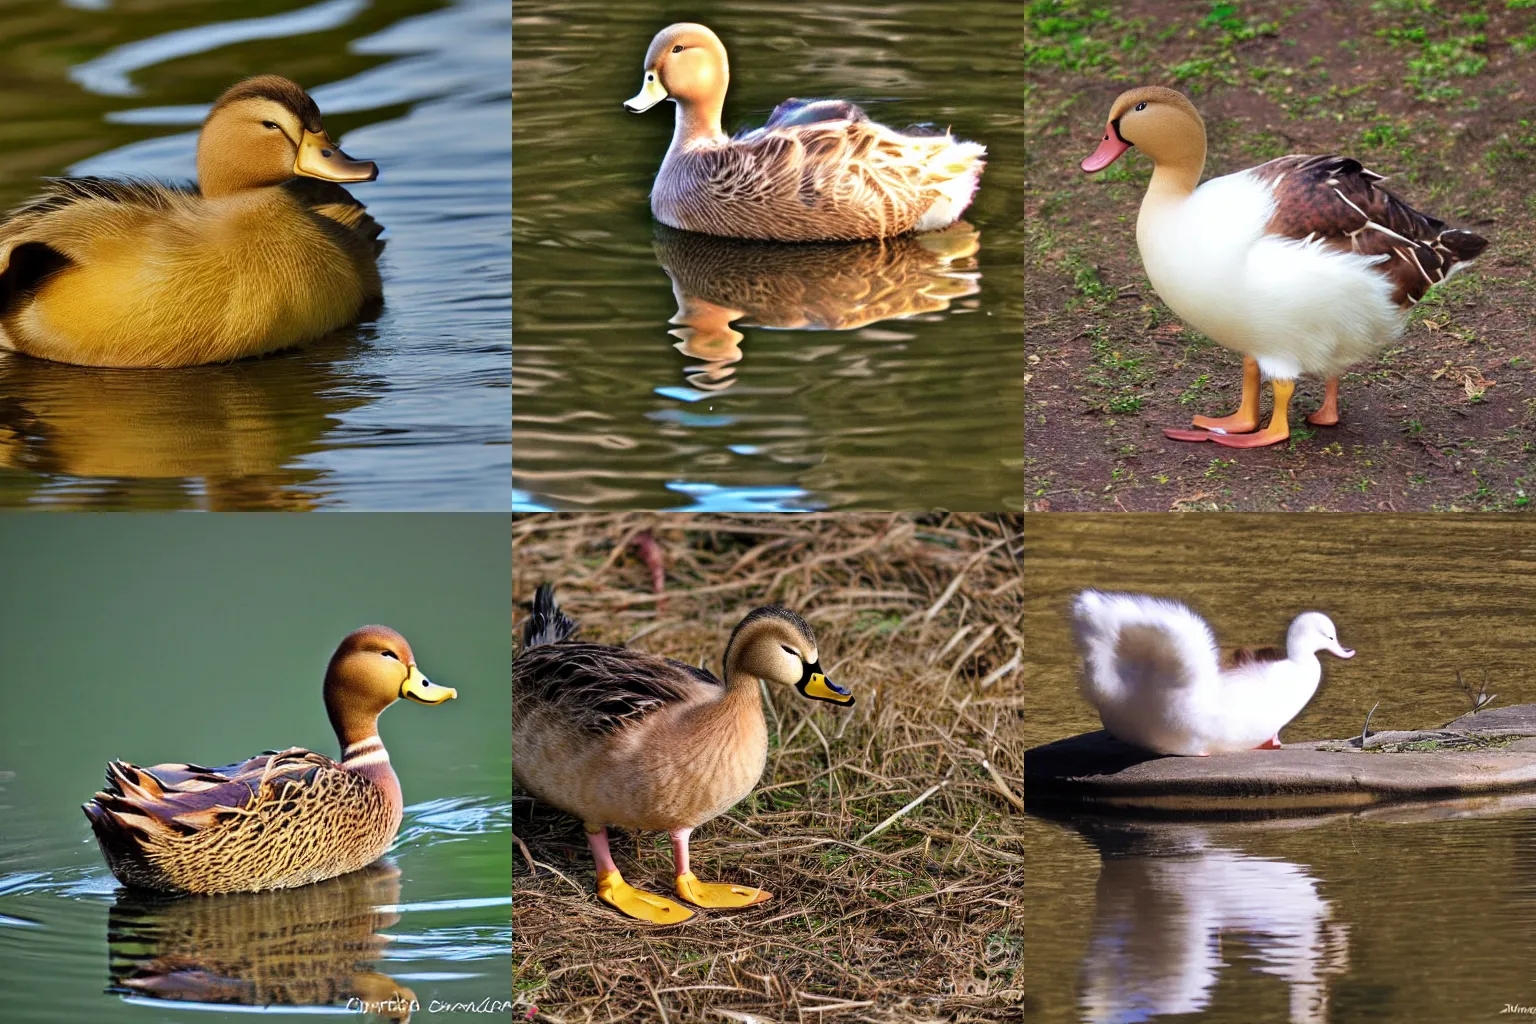 Prompt: Hermione Duck. Duck Hermione. Hybrid. Chimera. Nature photography.